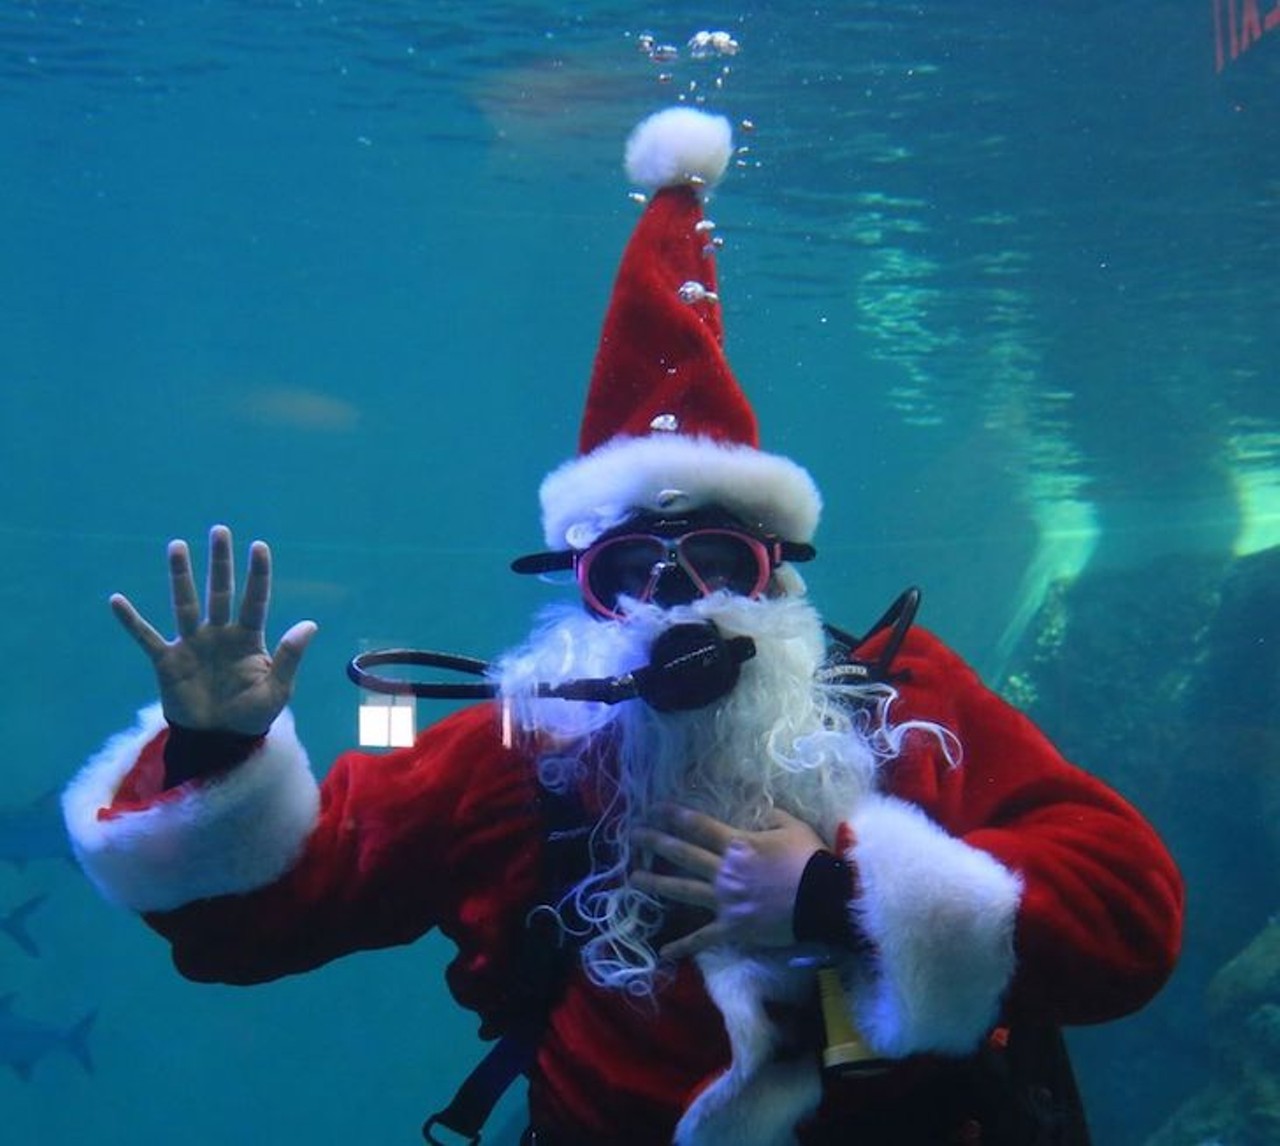 Winter&#146;s Wonderland
249 Windward Passage Clearwater, FL
November 16 &#150; January 6
Live in the ocean this winter without actually freezing your ass off. Winter&#146;s Wonderland offers guests the chance to hang out with Winter the dolphin and experience holiday-themed habitats. The kids can also spend the afternoon interacting with Santa and his elves as they dive in and out of the waters of Mavis&#146;s Rescue Hideaway. Go H.A.M. by booking a Sea of Lights boat cruise for $25.98.
Photo via SeeWinter/Facebook